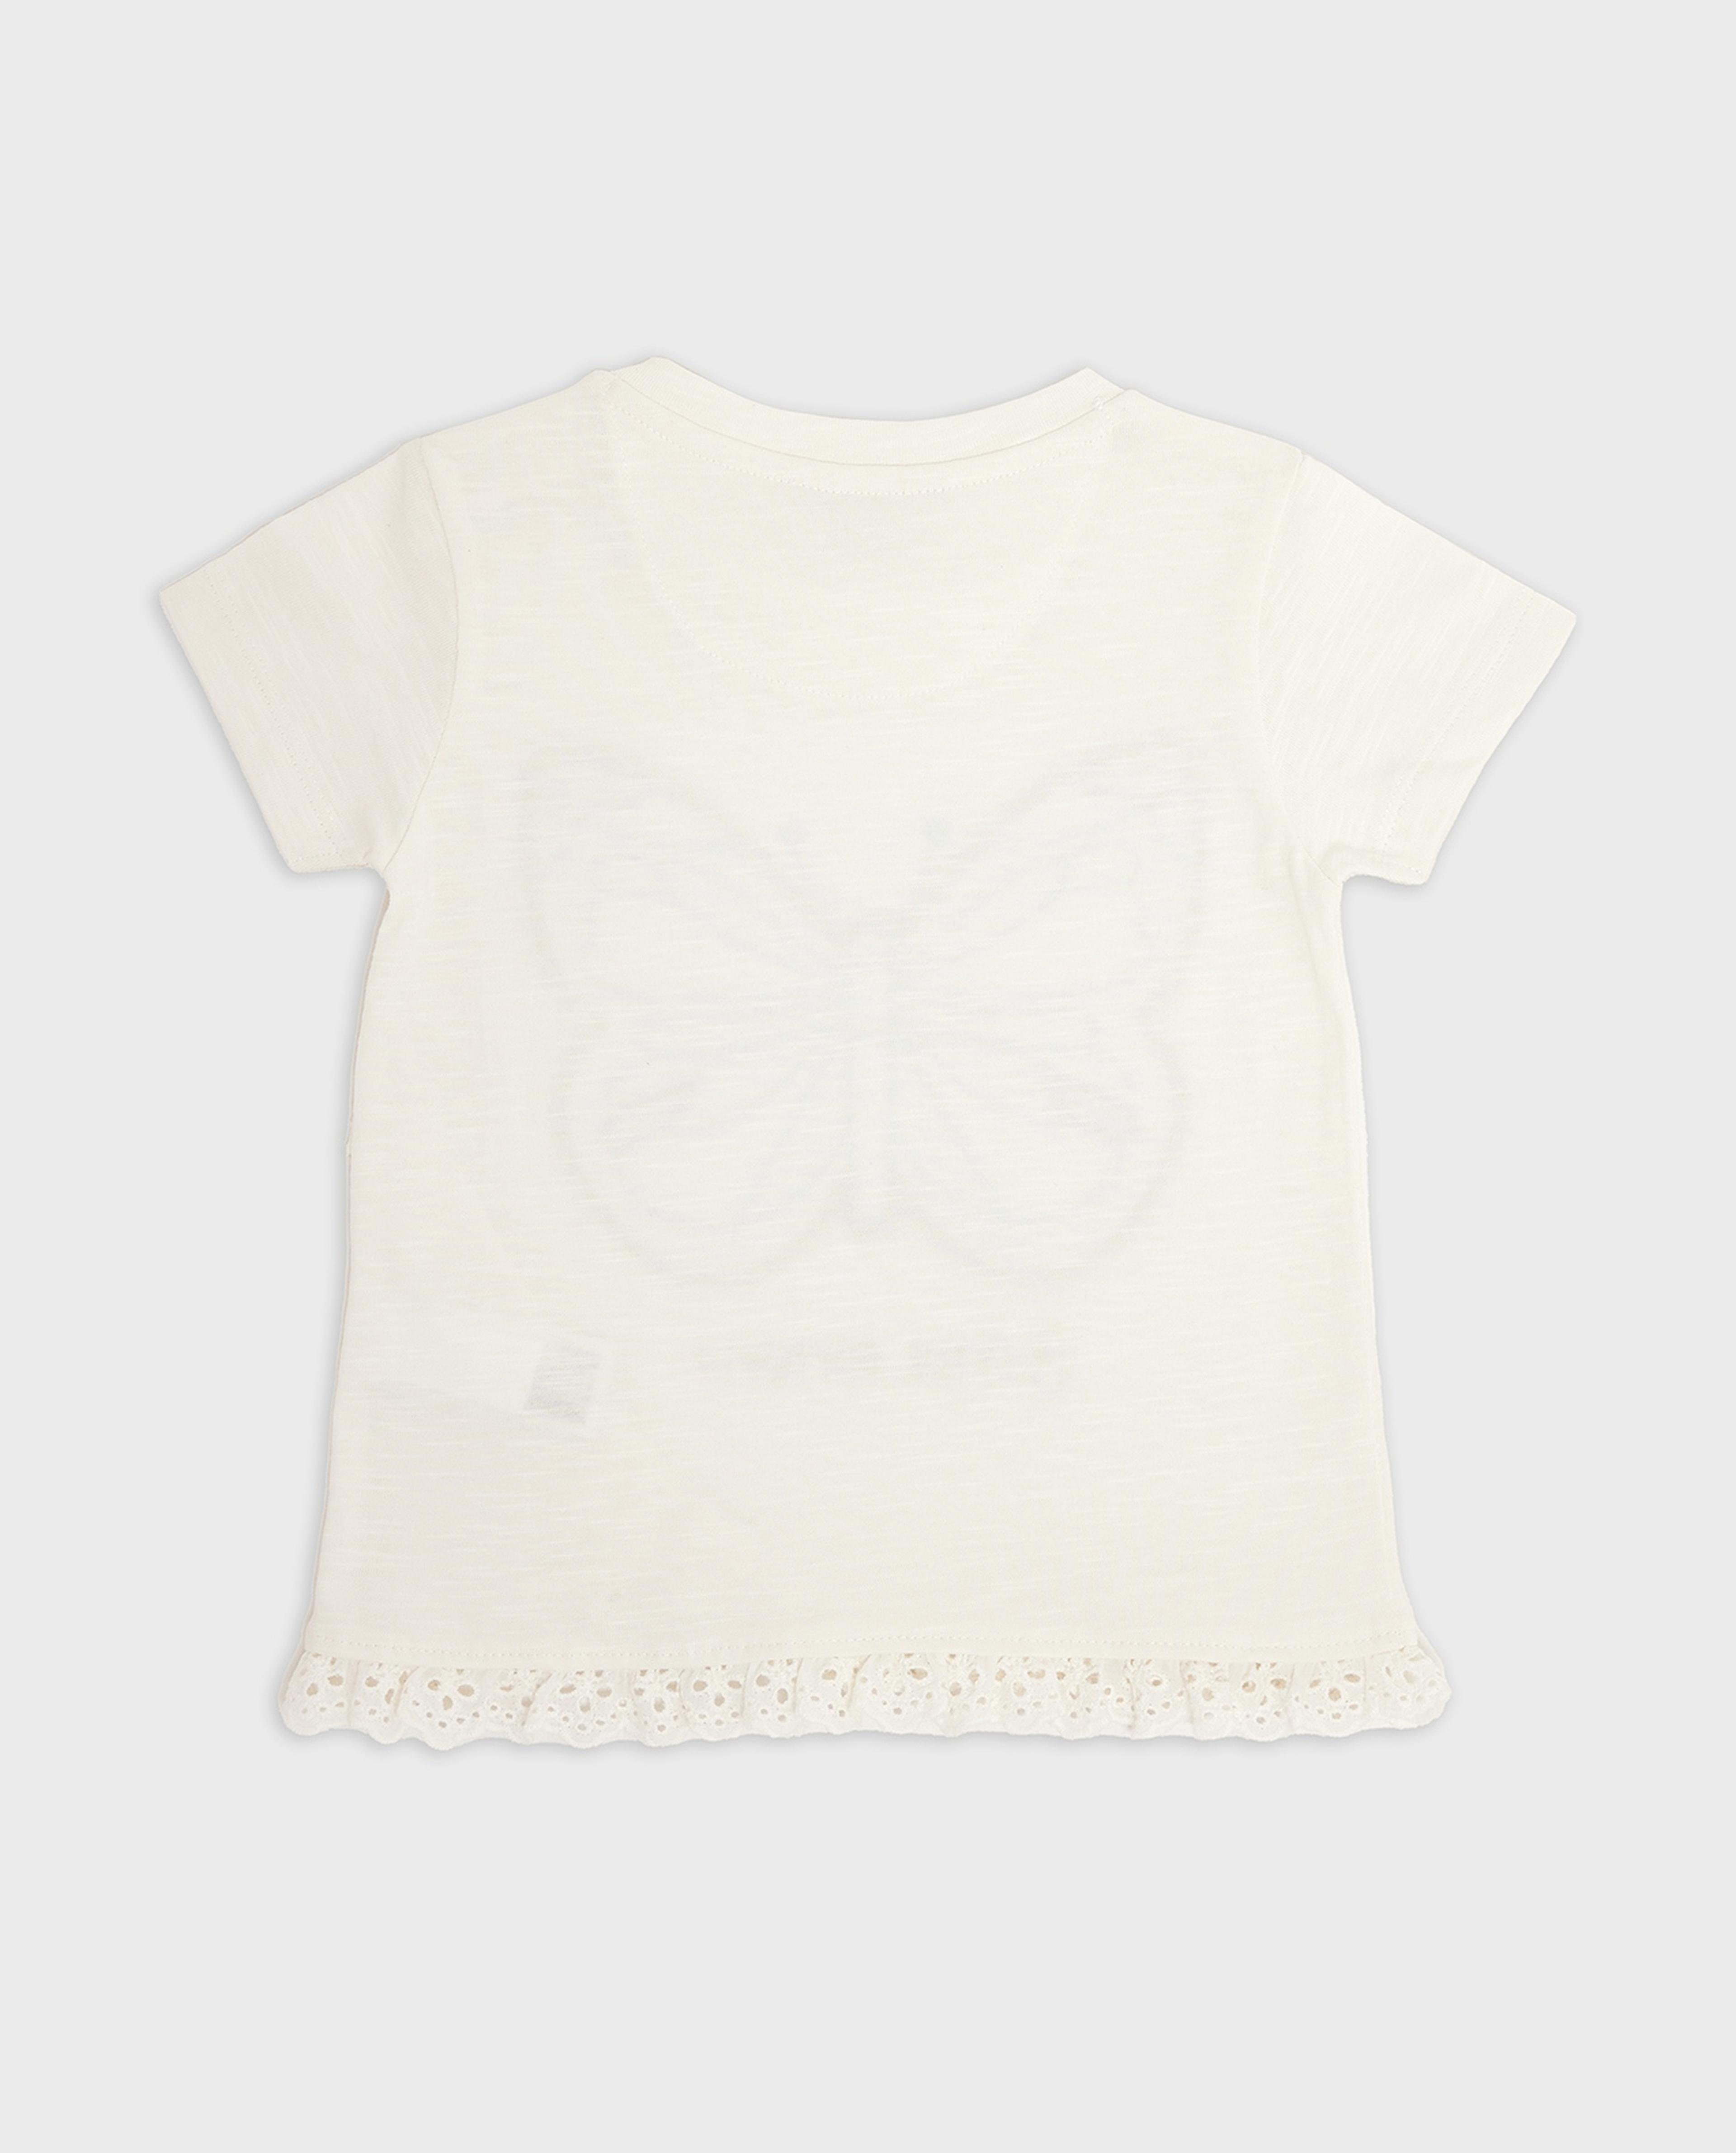 Embroidered Top with Crew Neck and Short Sleeves